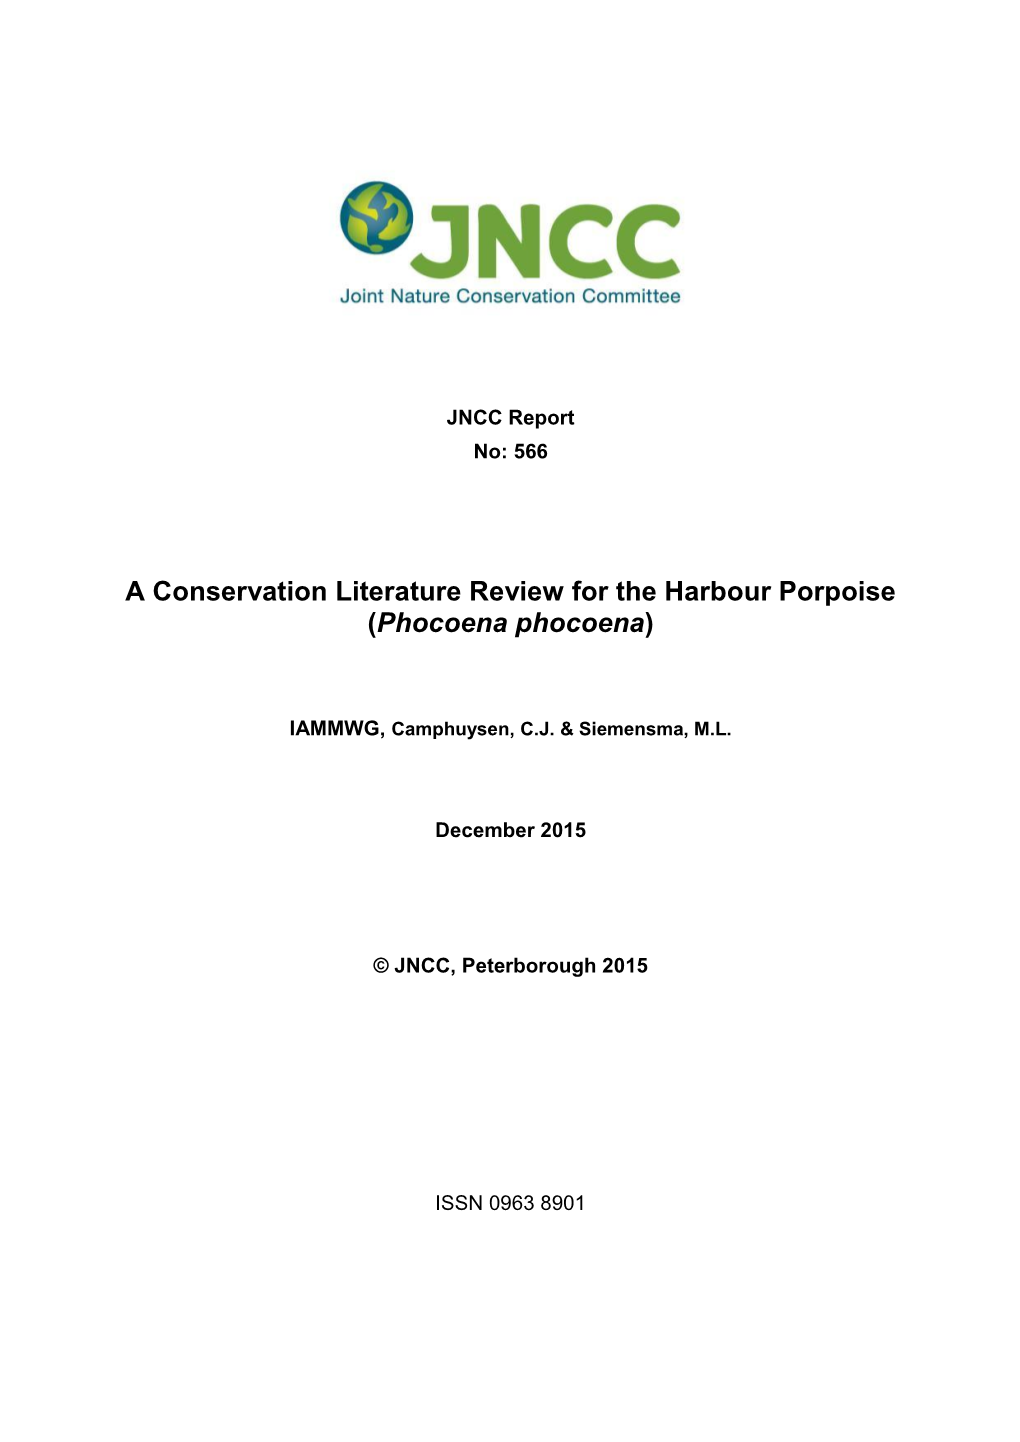 A Conservation Literature Review for the Harbour Porpoise (Phocoena Phocoena)